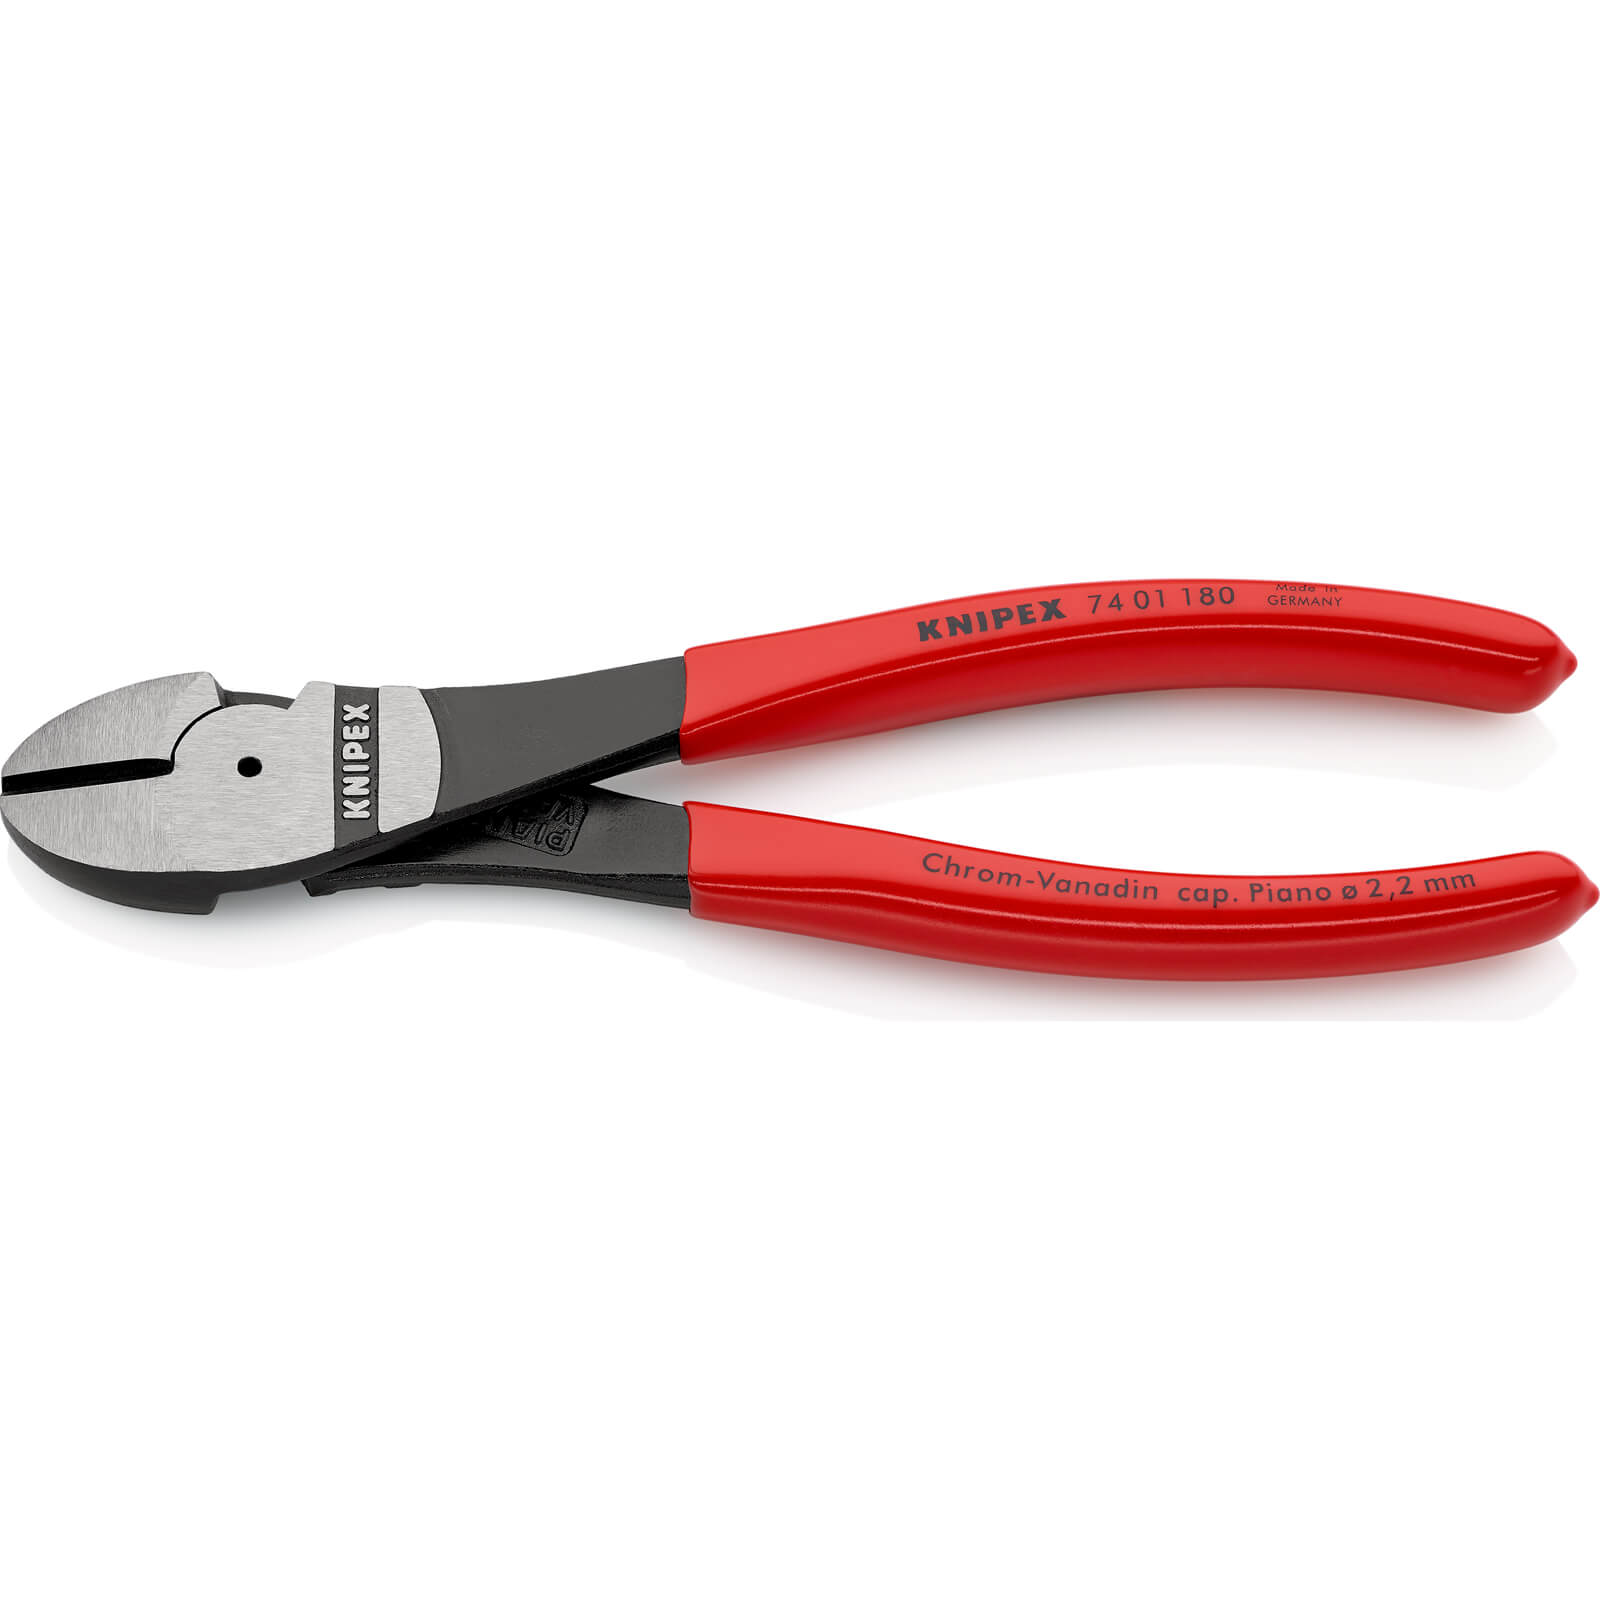 Image of Knipex 74 01 High Leverage Diagonal Cutting Pliers 180mm